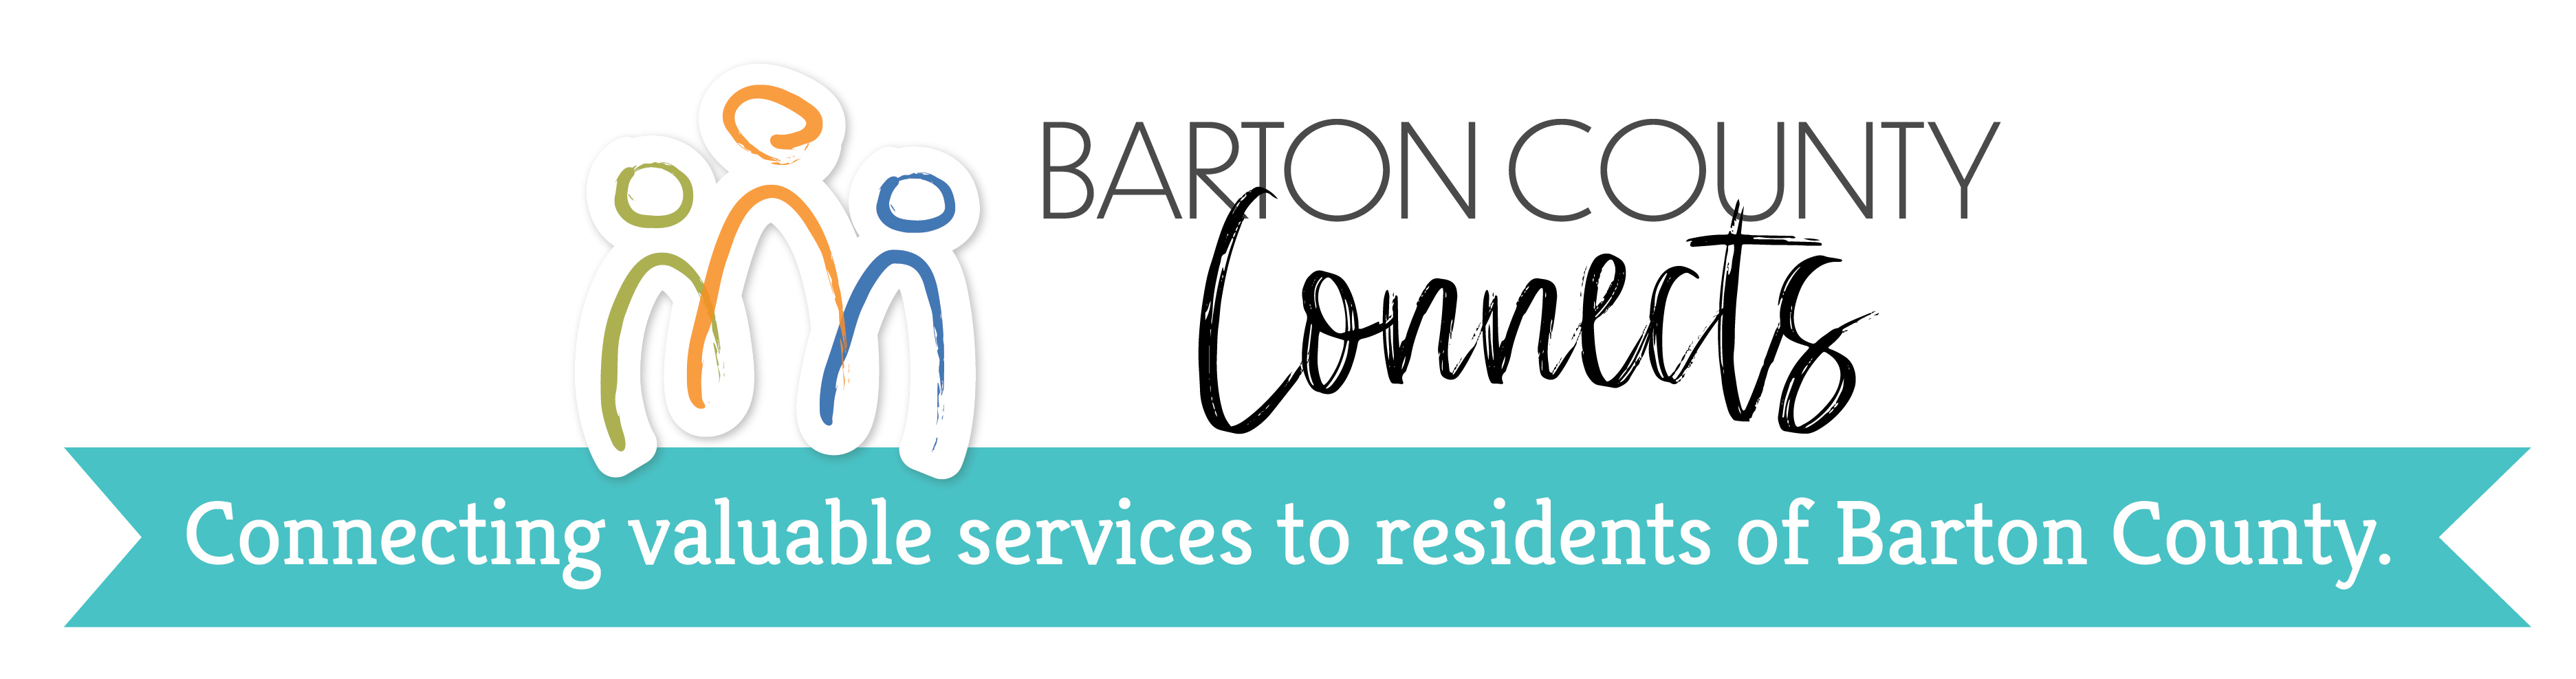 Barton County Connects